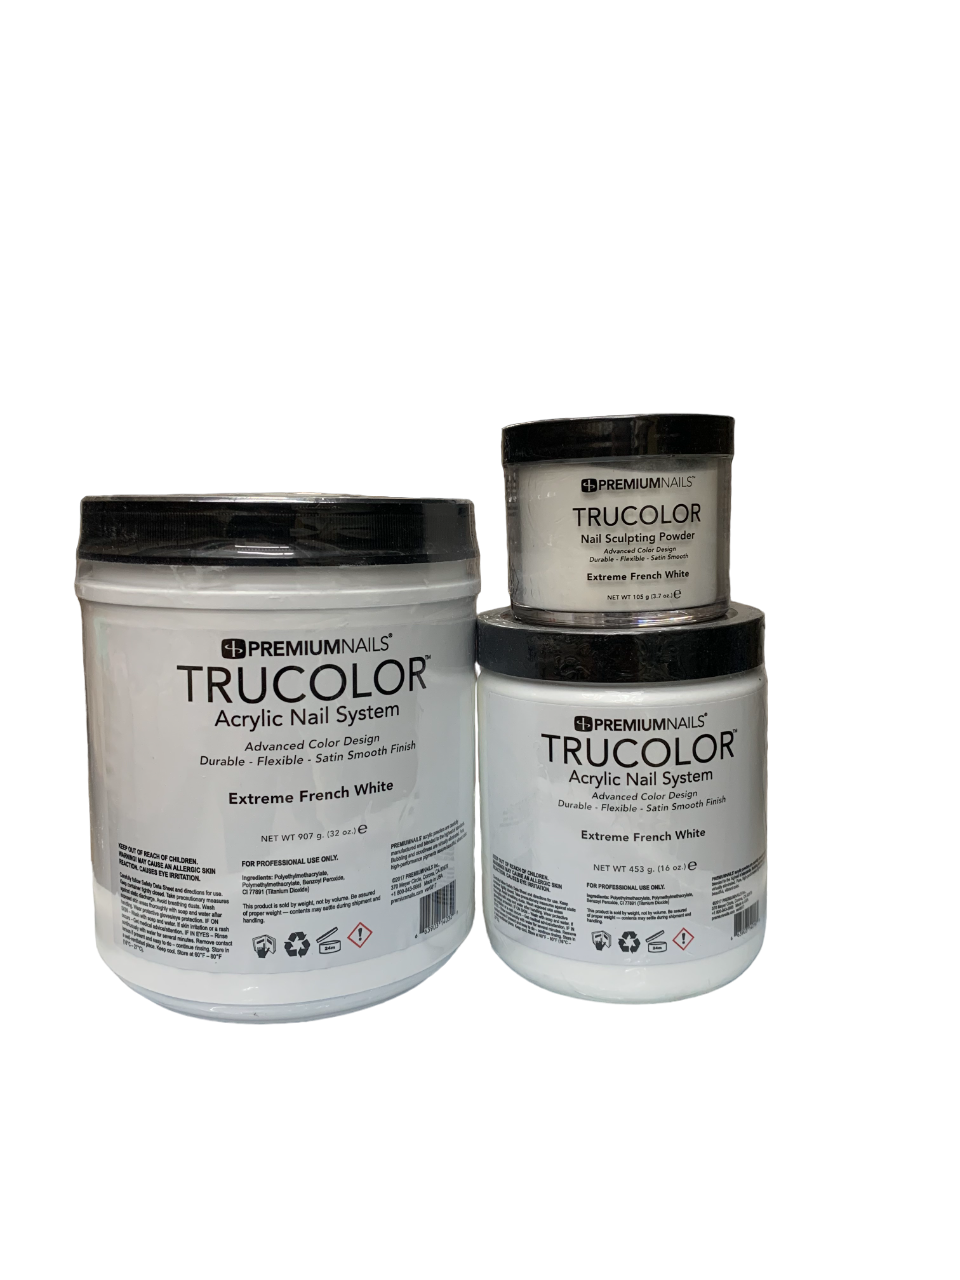 Premiumnails Trucolor Acrylic Powder - TCEFW - Extreme French White